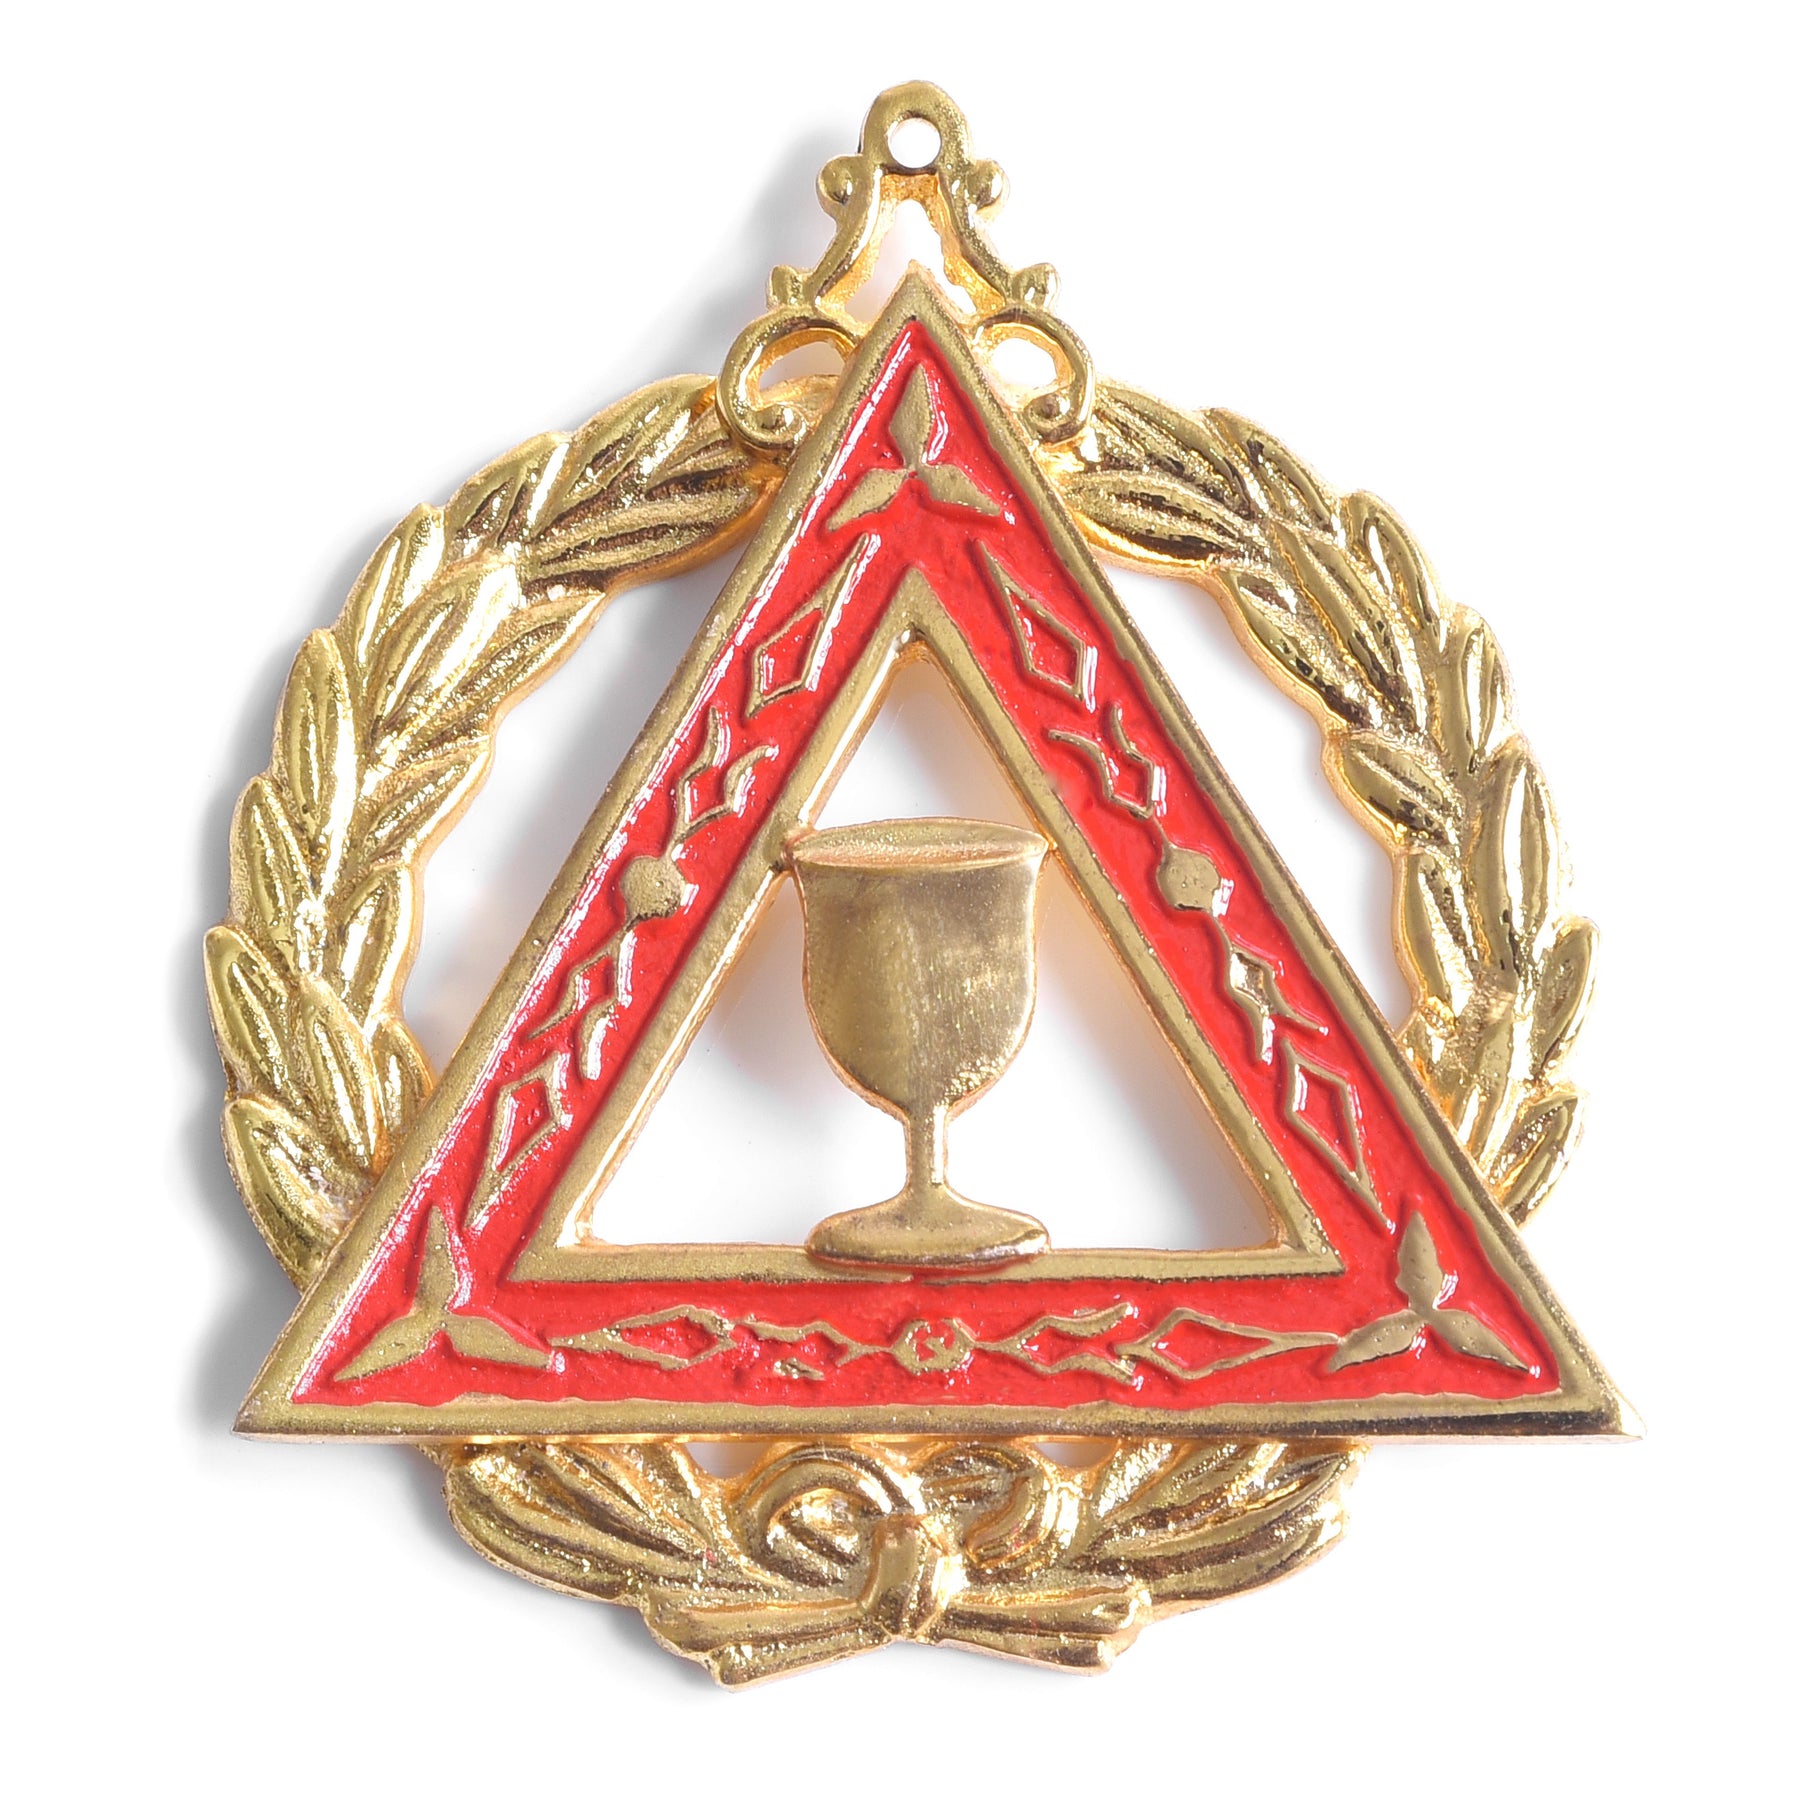 Grand Worthy Electa OES Officer Collar Jewel - Gold Plated With Red - Bricks Masons